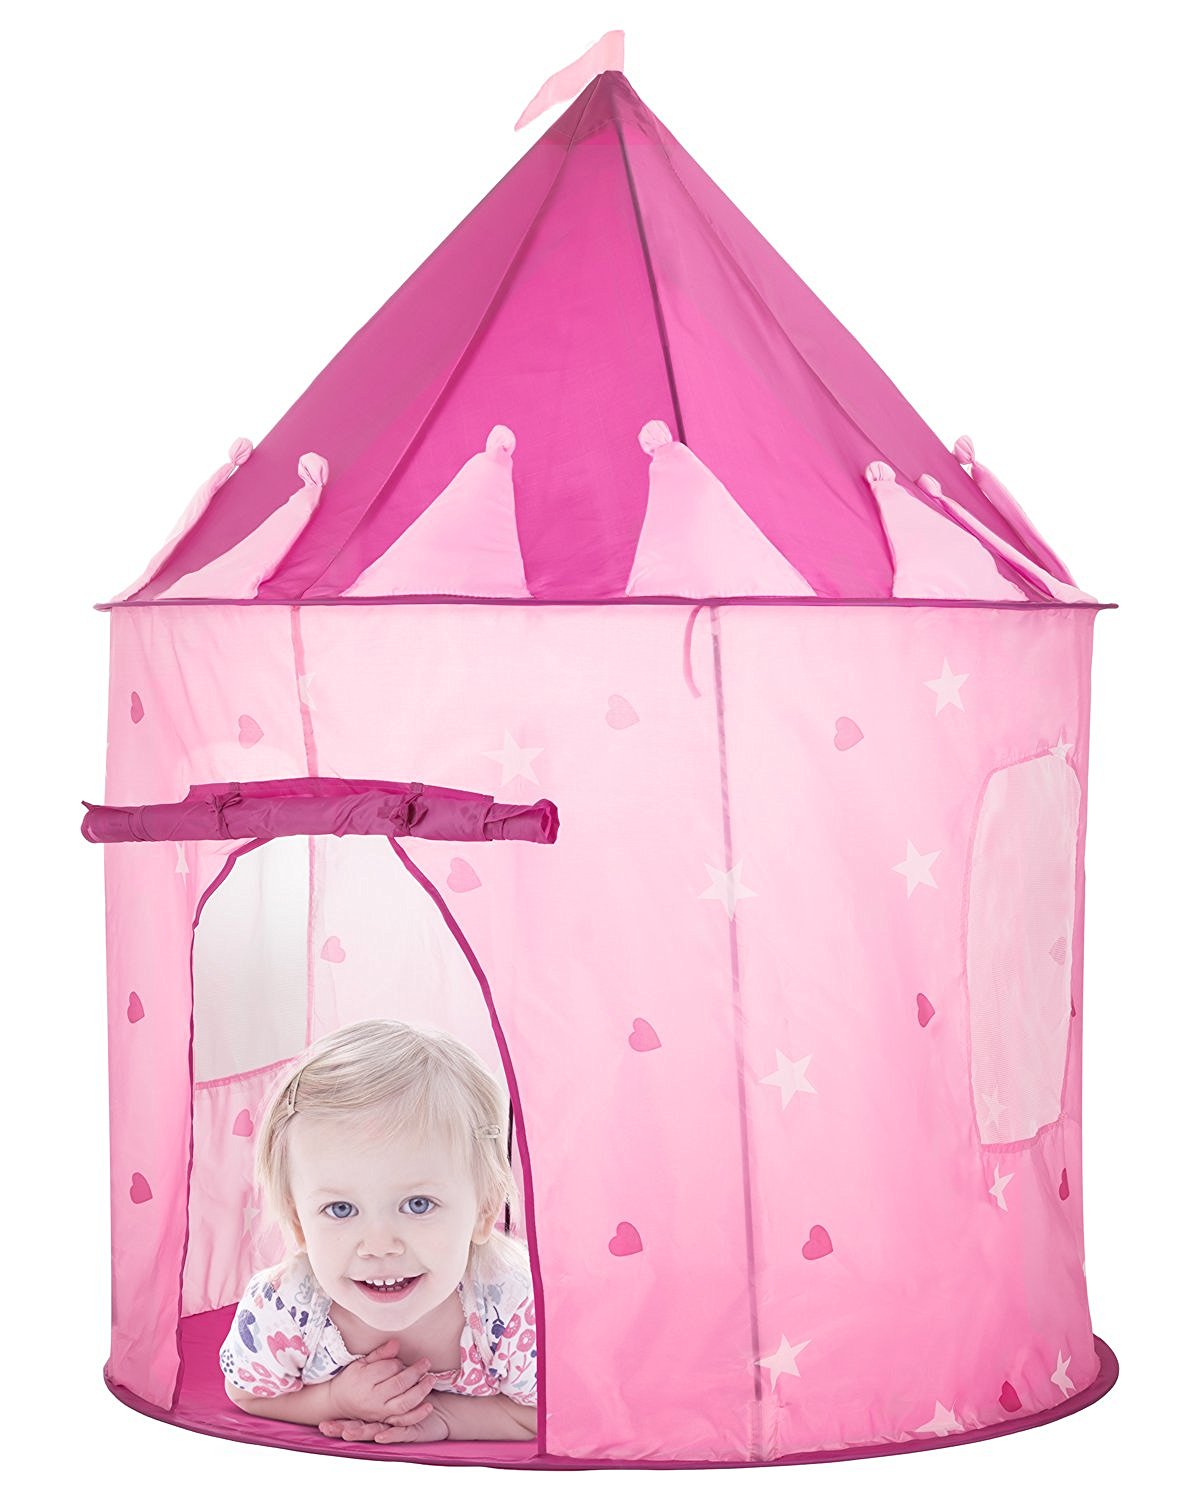 Toyniverse Girls Pink Play Tent Princess Castle with Glow In The Dark Stars - 41.3" X 49.2" *FREE SHIPPING*